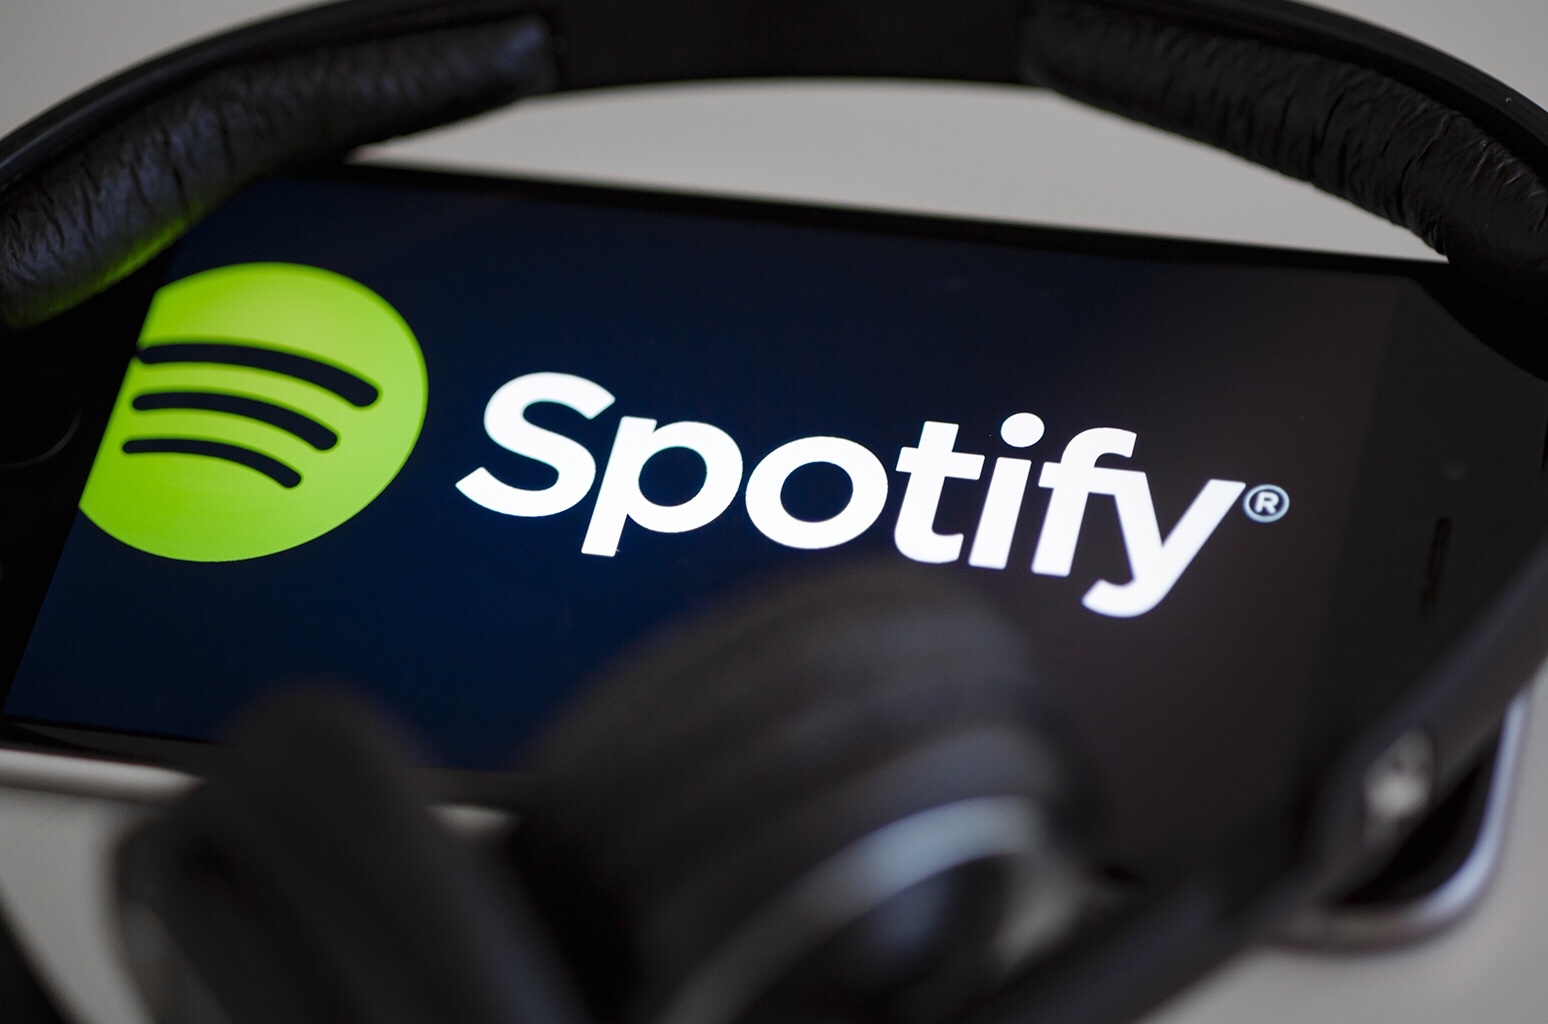 Spotify has quietly filed to become a public company